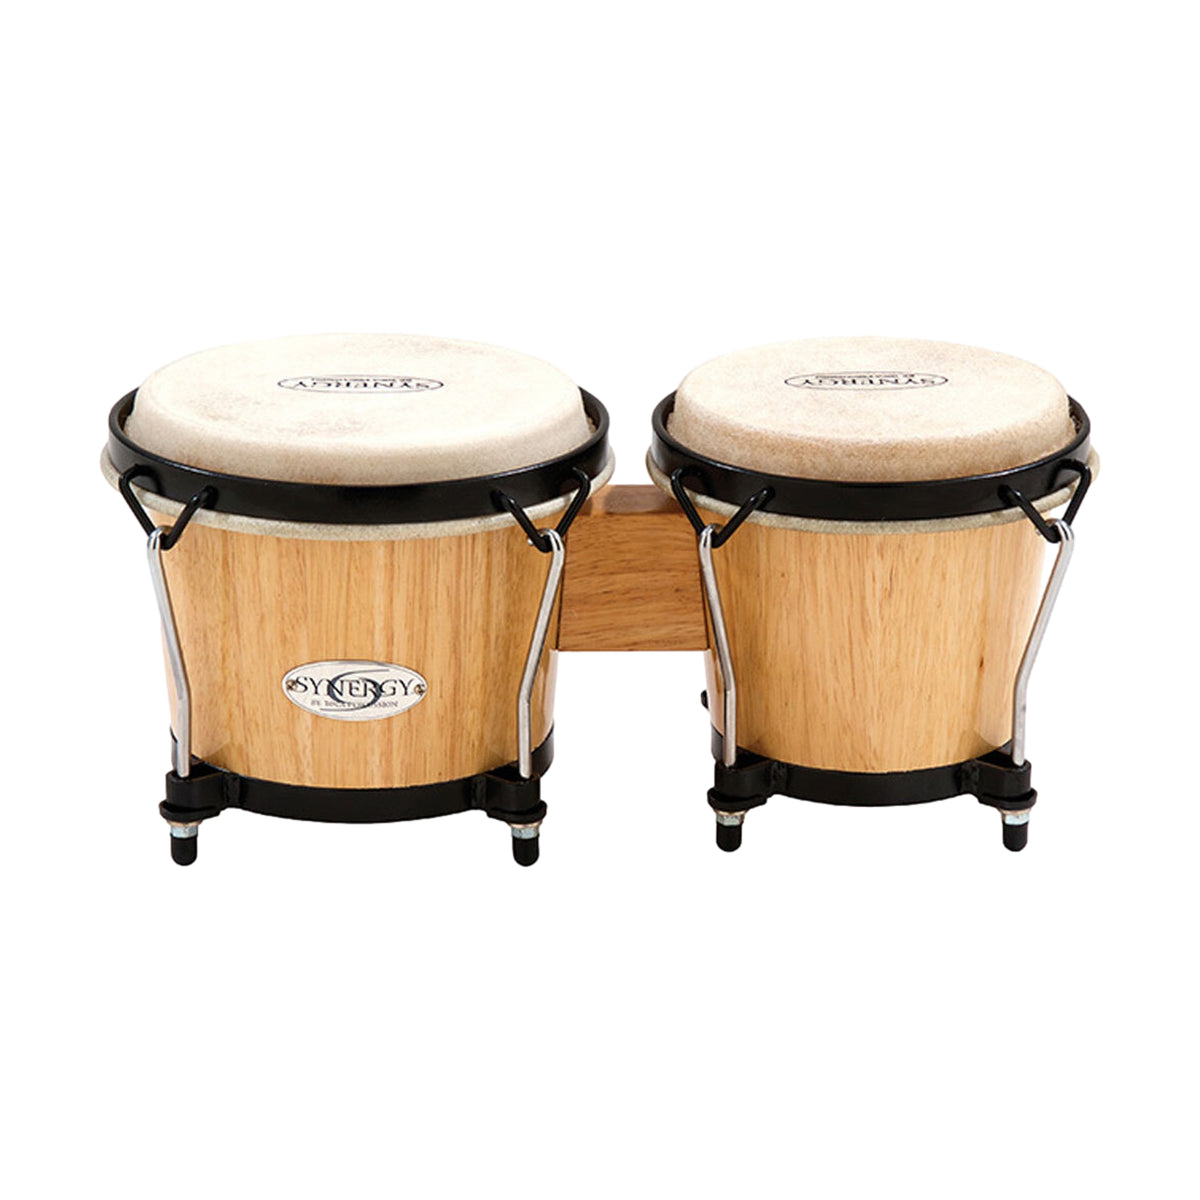 Toca 6 and 7 Inch Synergy Series Wooden Bongos Natural